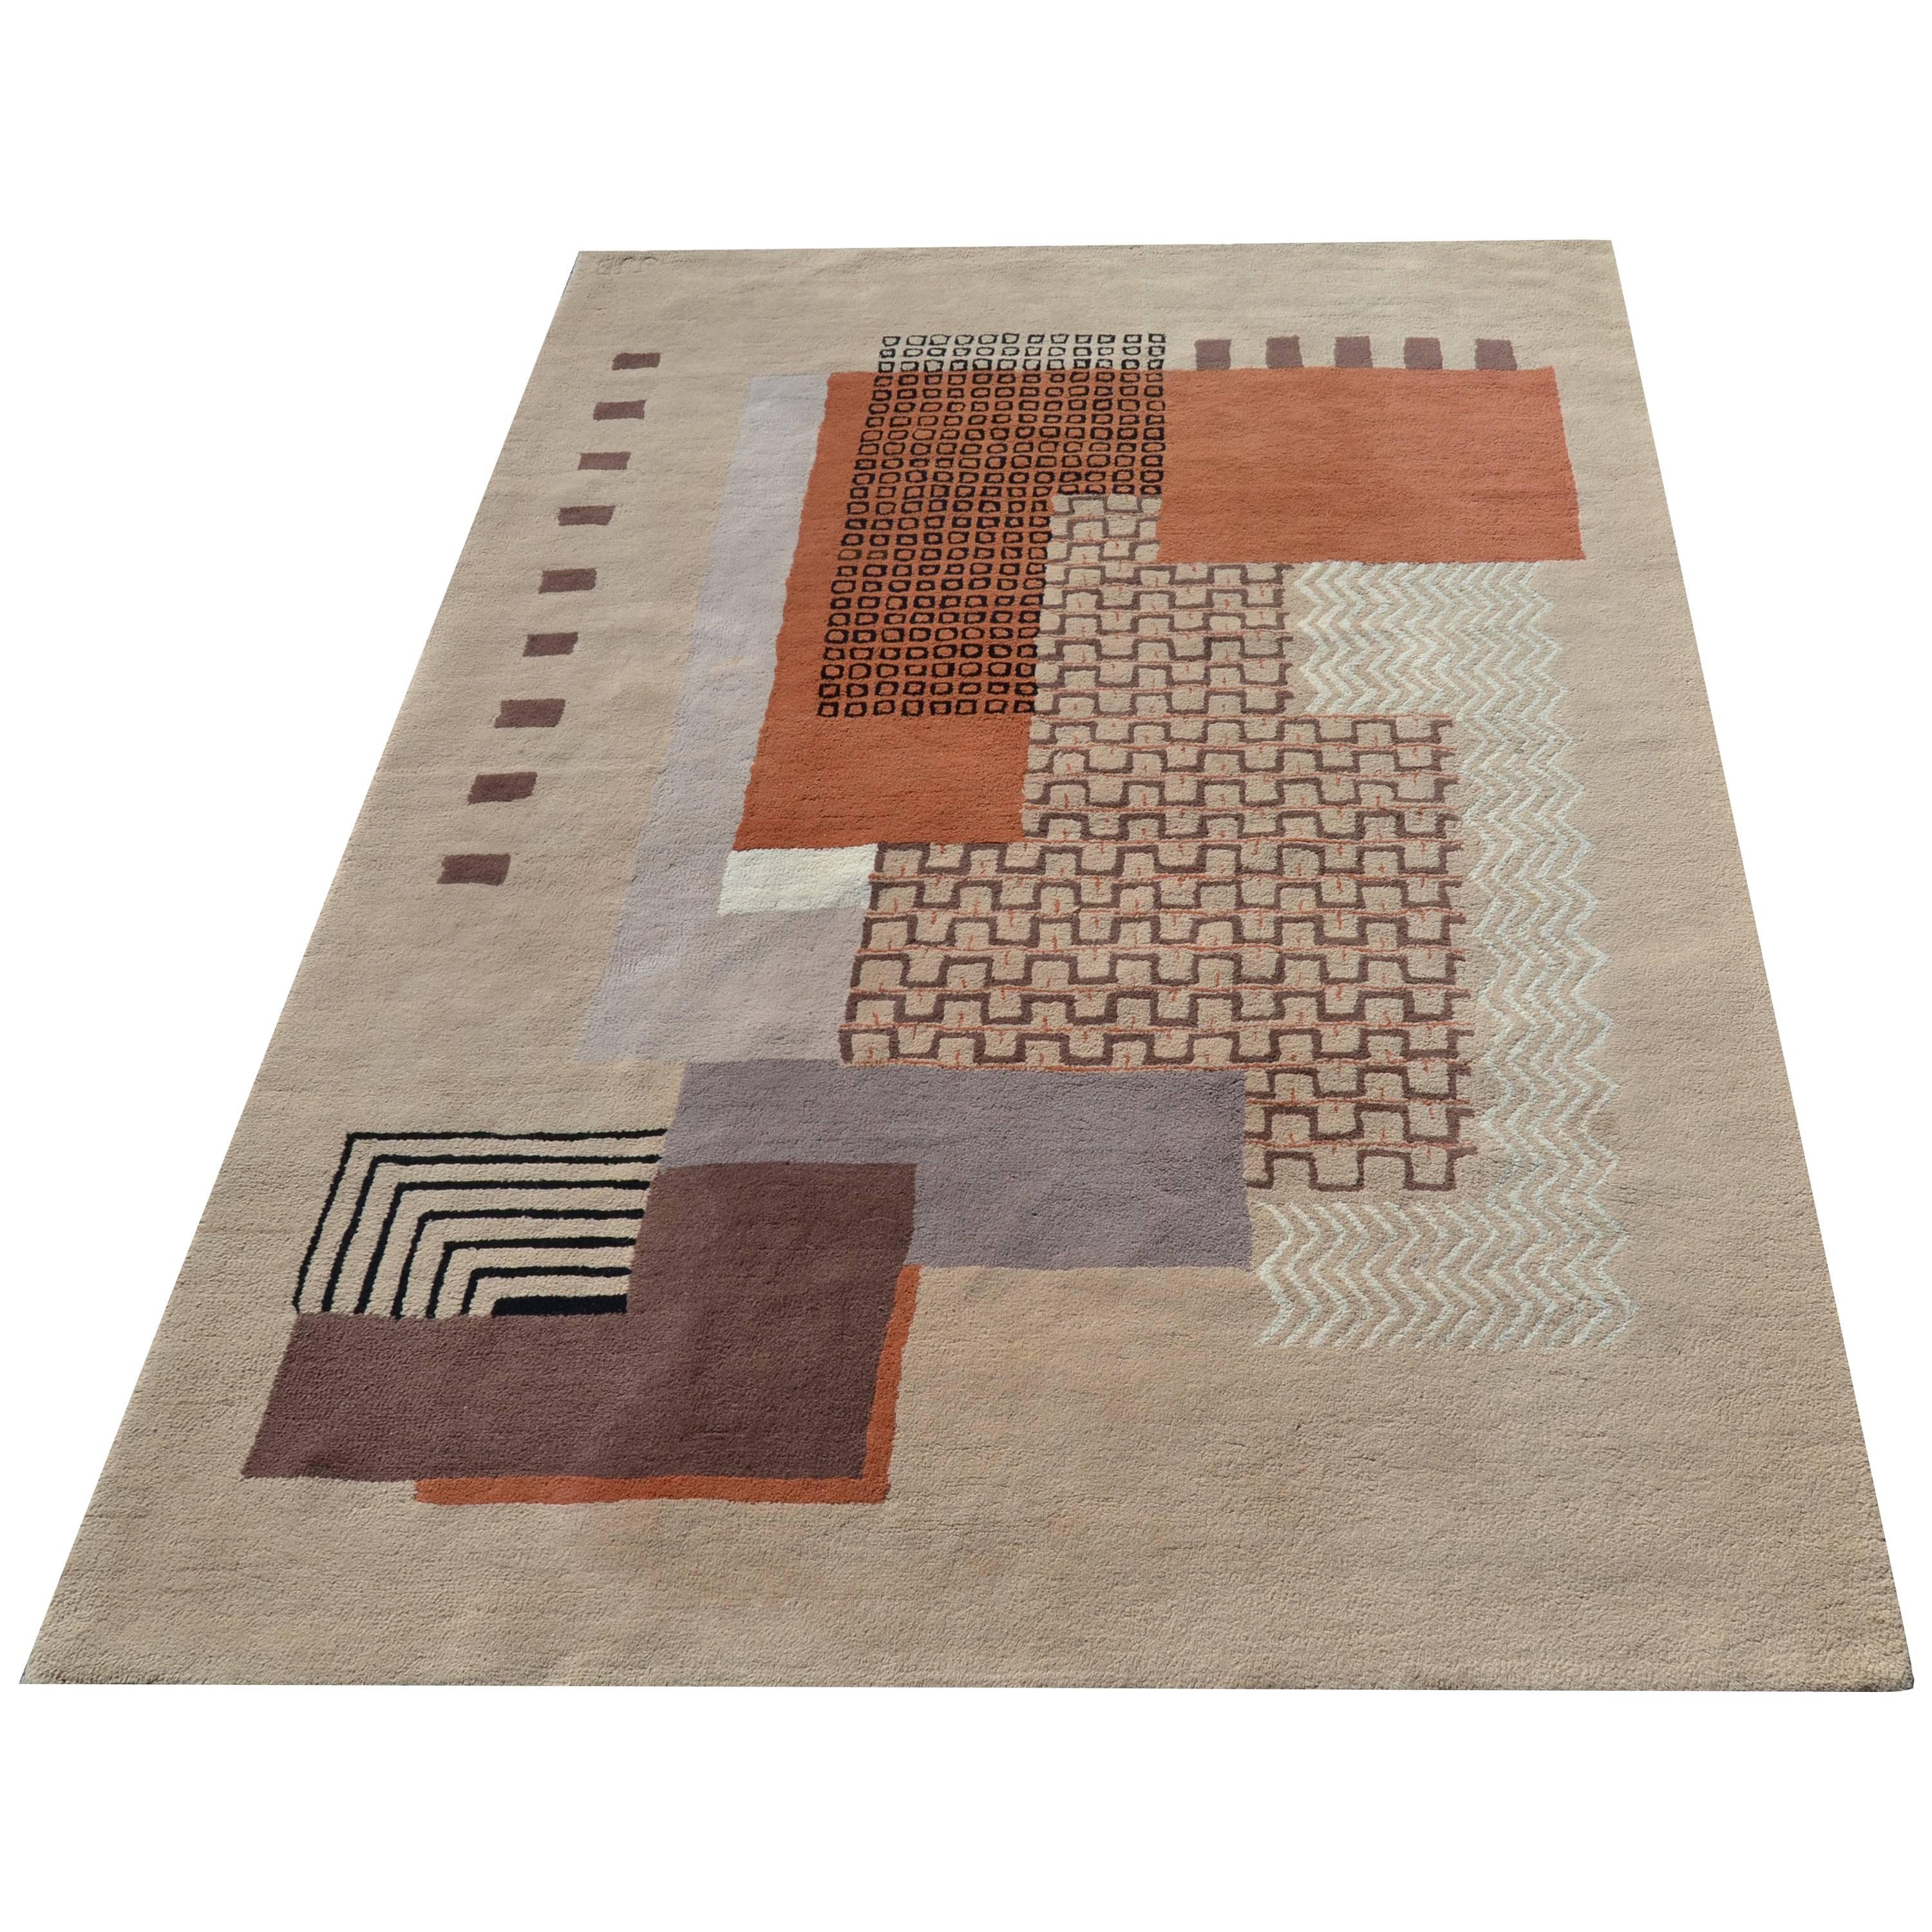 Exquisite Mid-Century Modern Handmade Artisan carpet, rug. 
Wool knotted carpet in a geometric patterned design featuring color blocking, square overlays, wave patterns, reminiscent of the Digital Age. Patterns and color combinations that are still